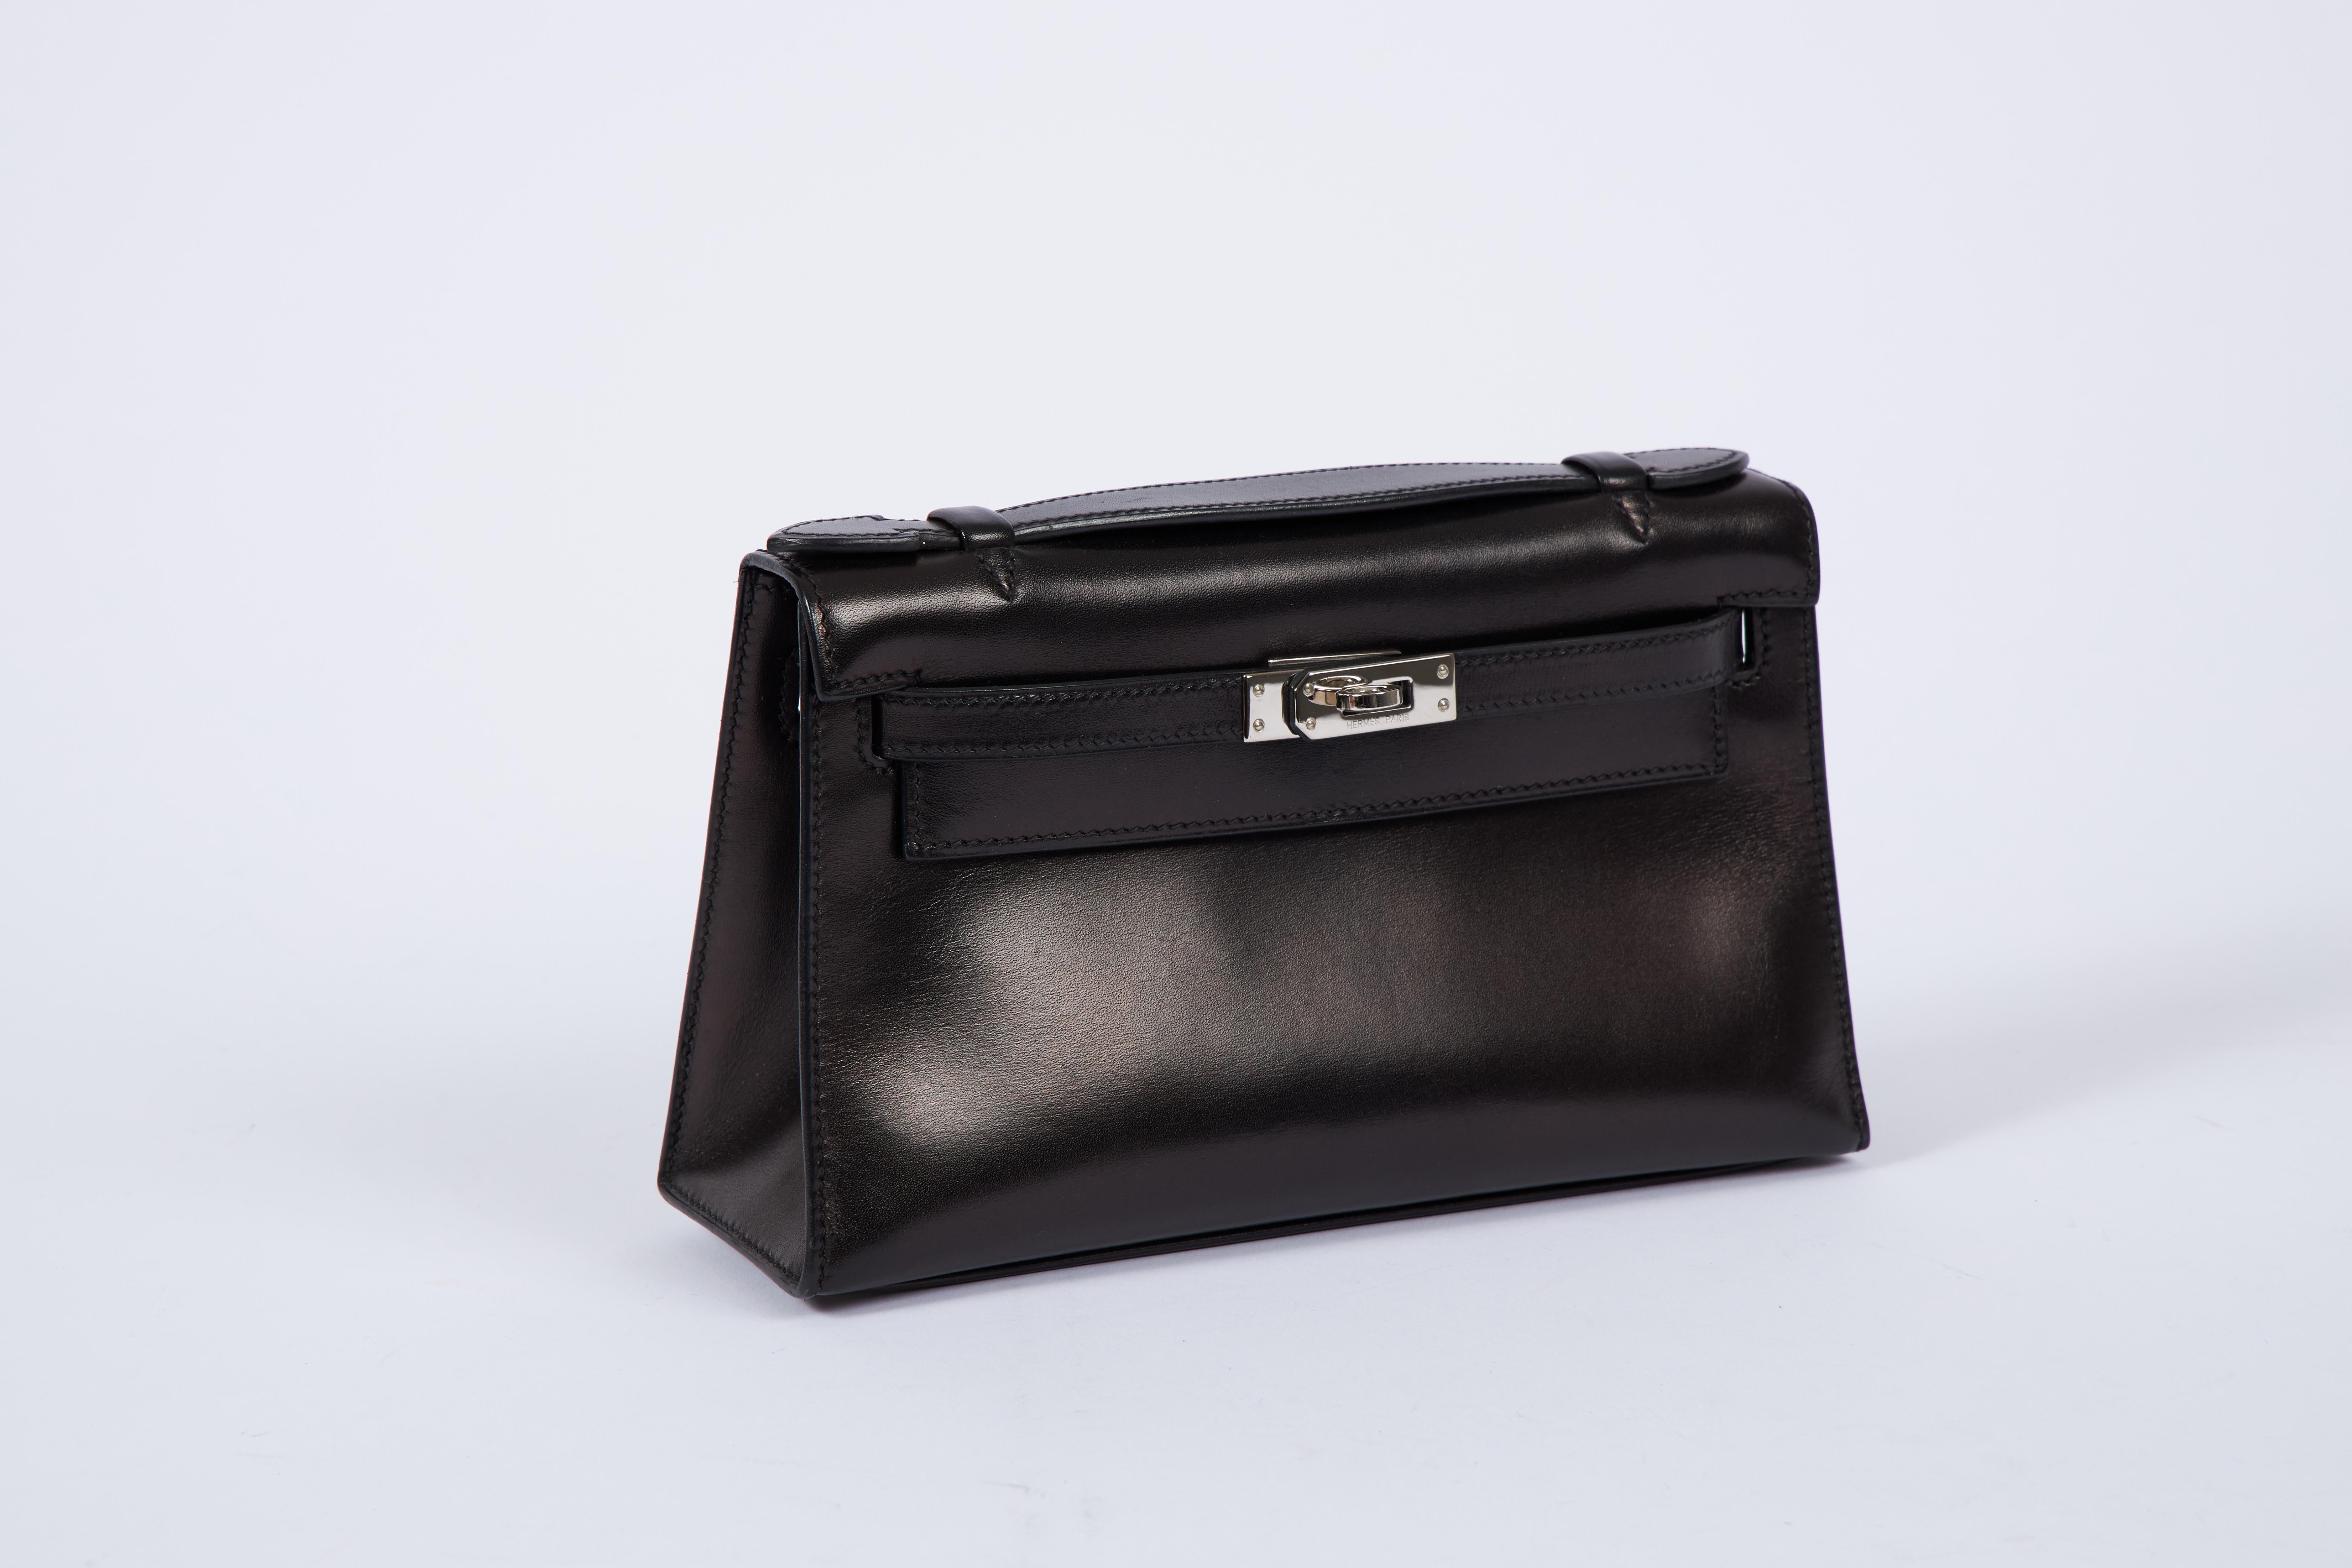 Hermes black box calf Kelly couchette with palladium hardware. Partial plastic on hardware. Date stamp J, 2006. Comes with original dust cover.